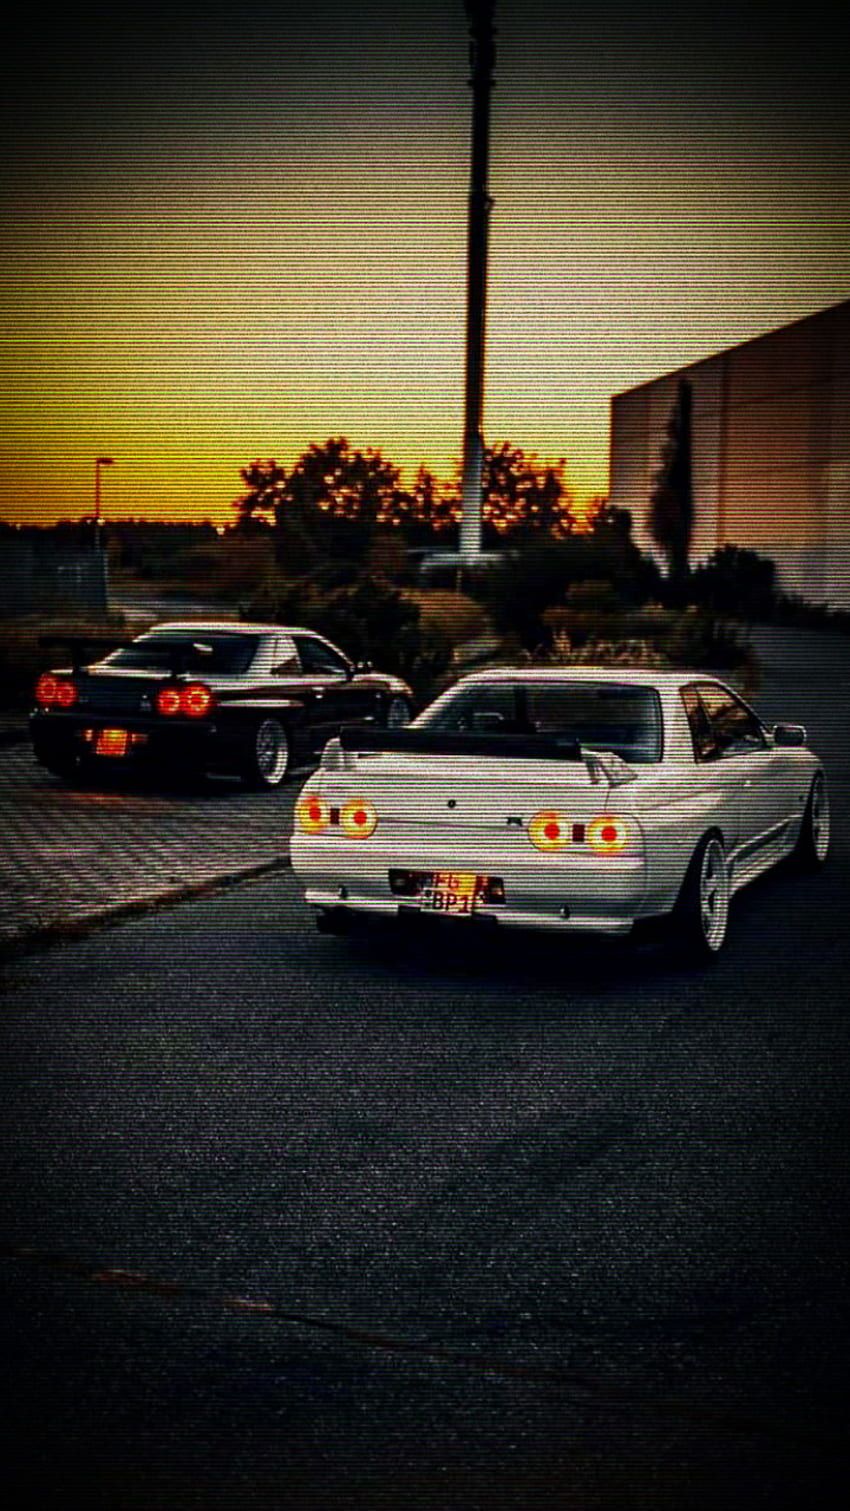 A car parked next to another one at night - Nissan Skyline